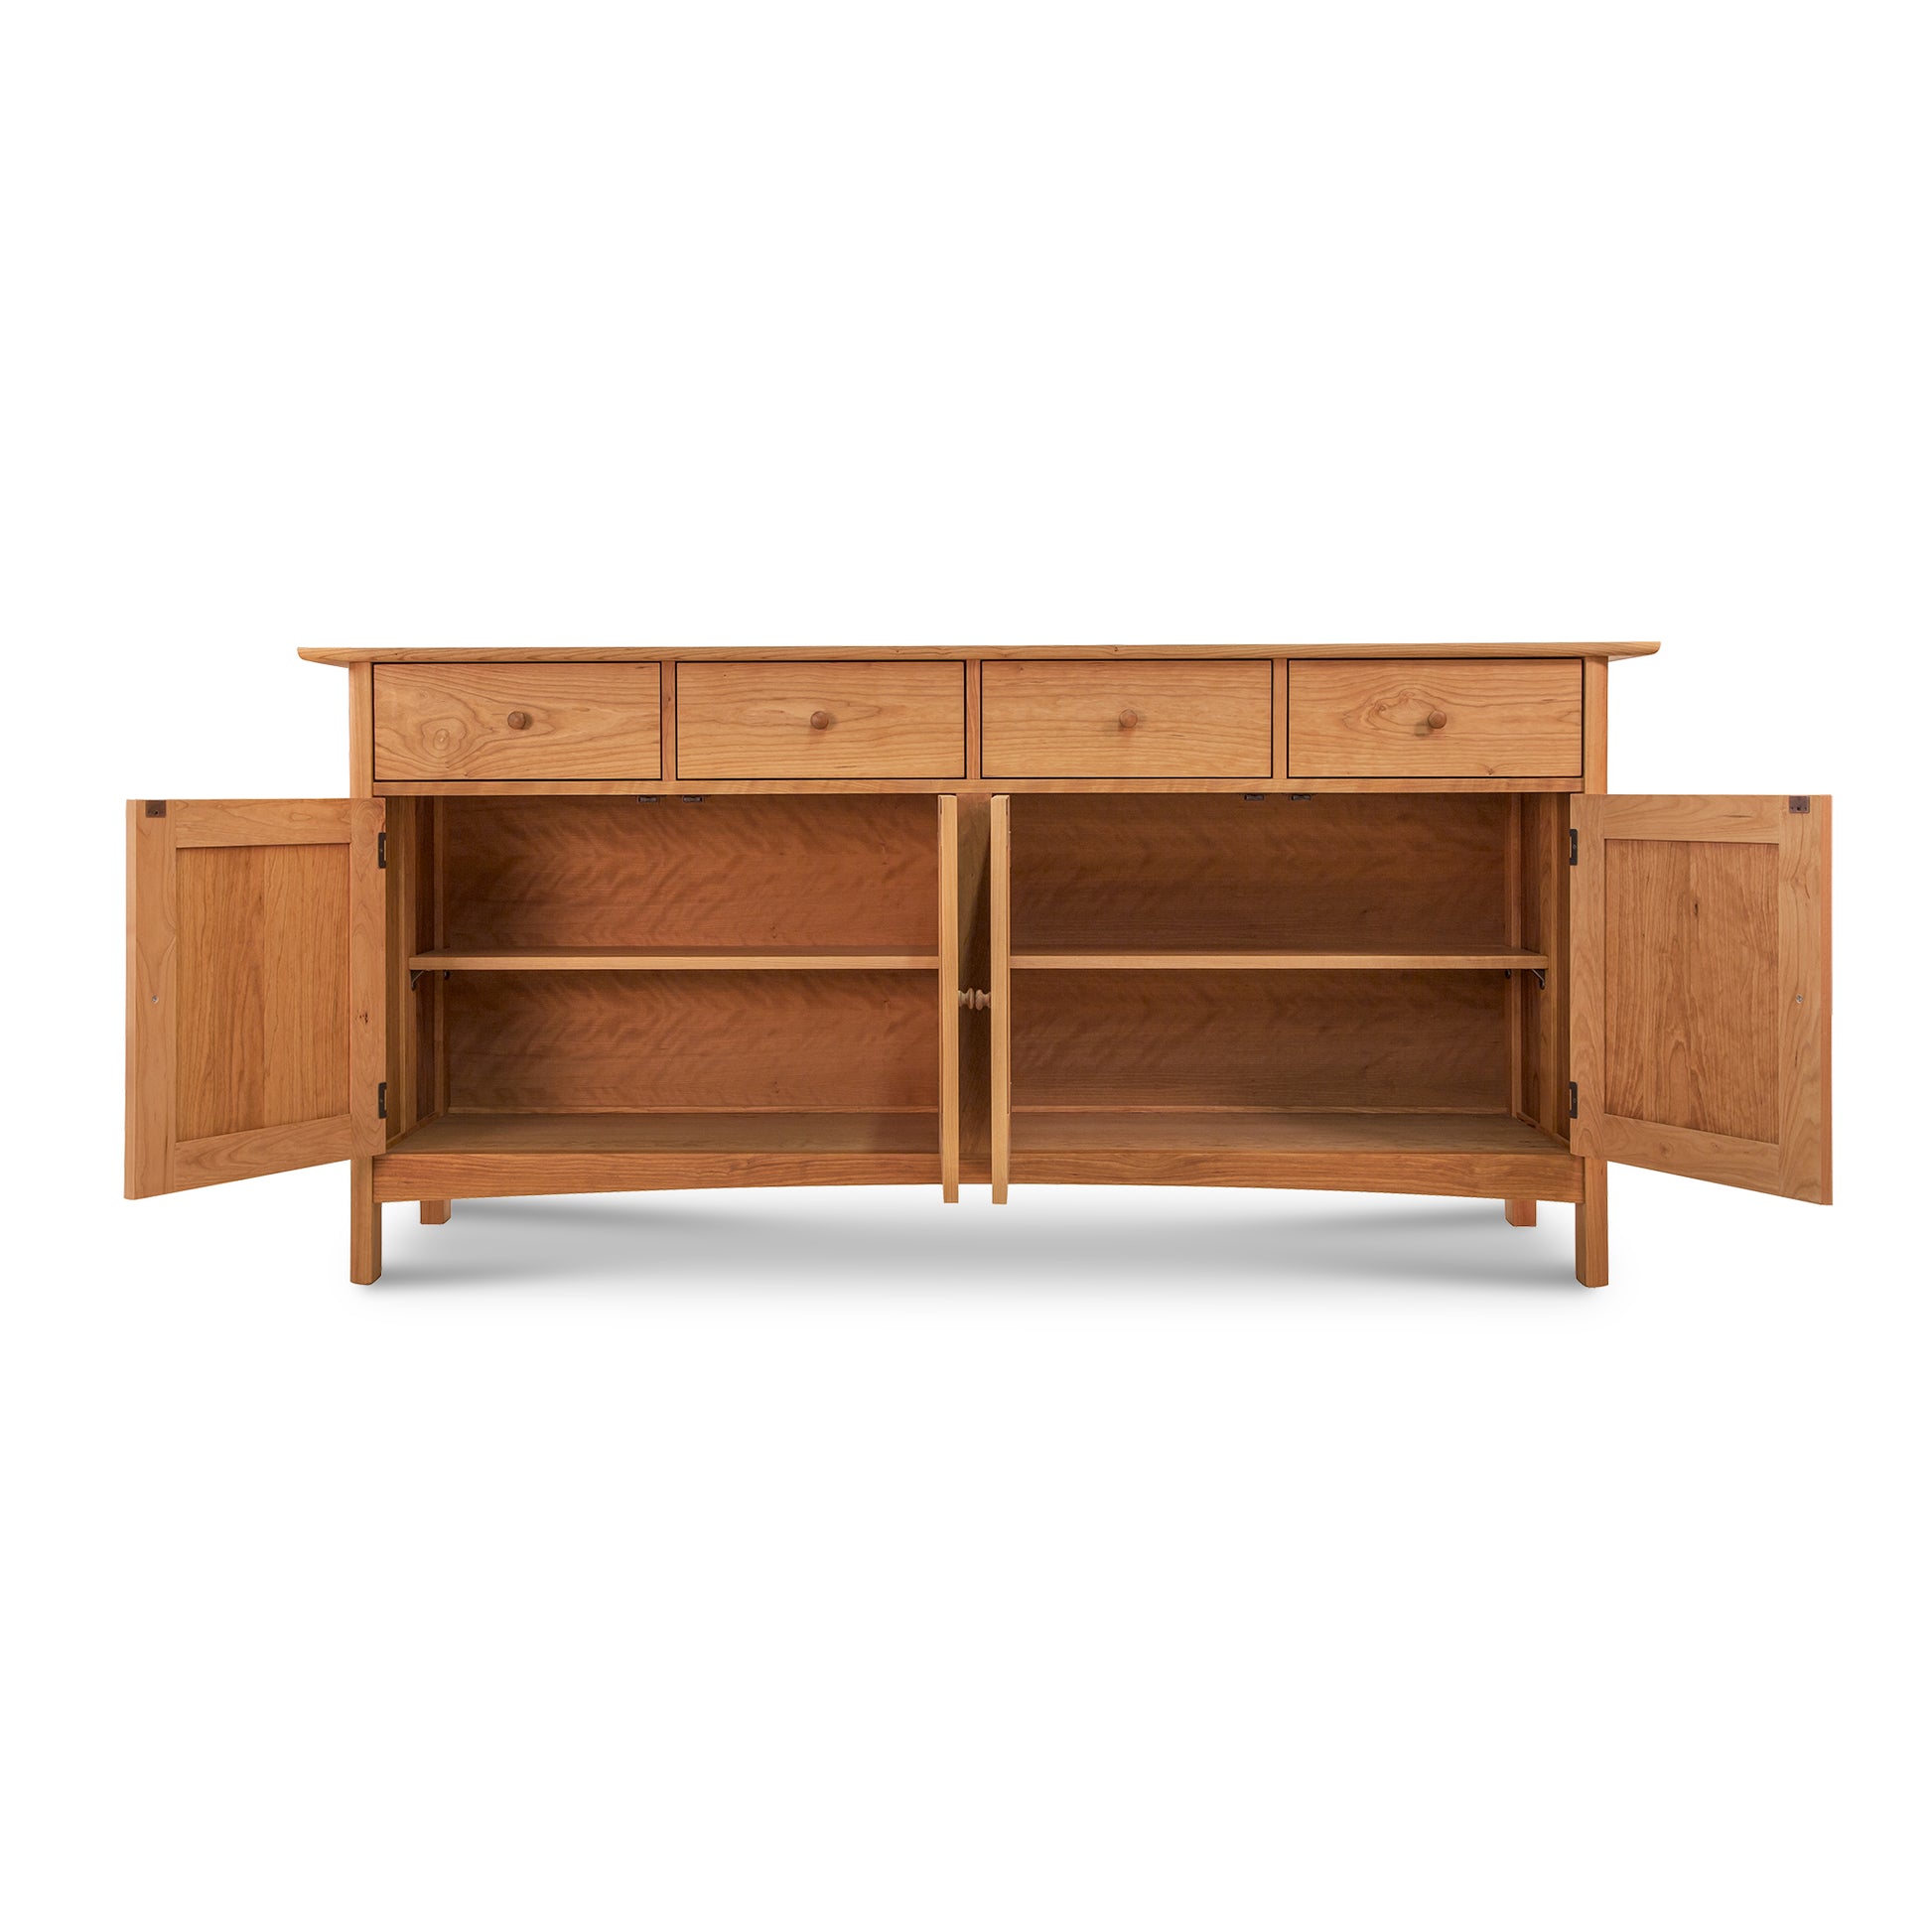 A Heartwood Shaker Long Sideboard with four drawers and two side cabinets, displayed against a white background by Vermont Furniture Designs.